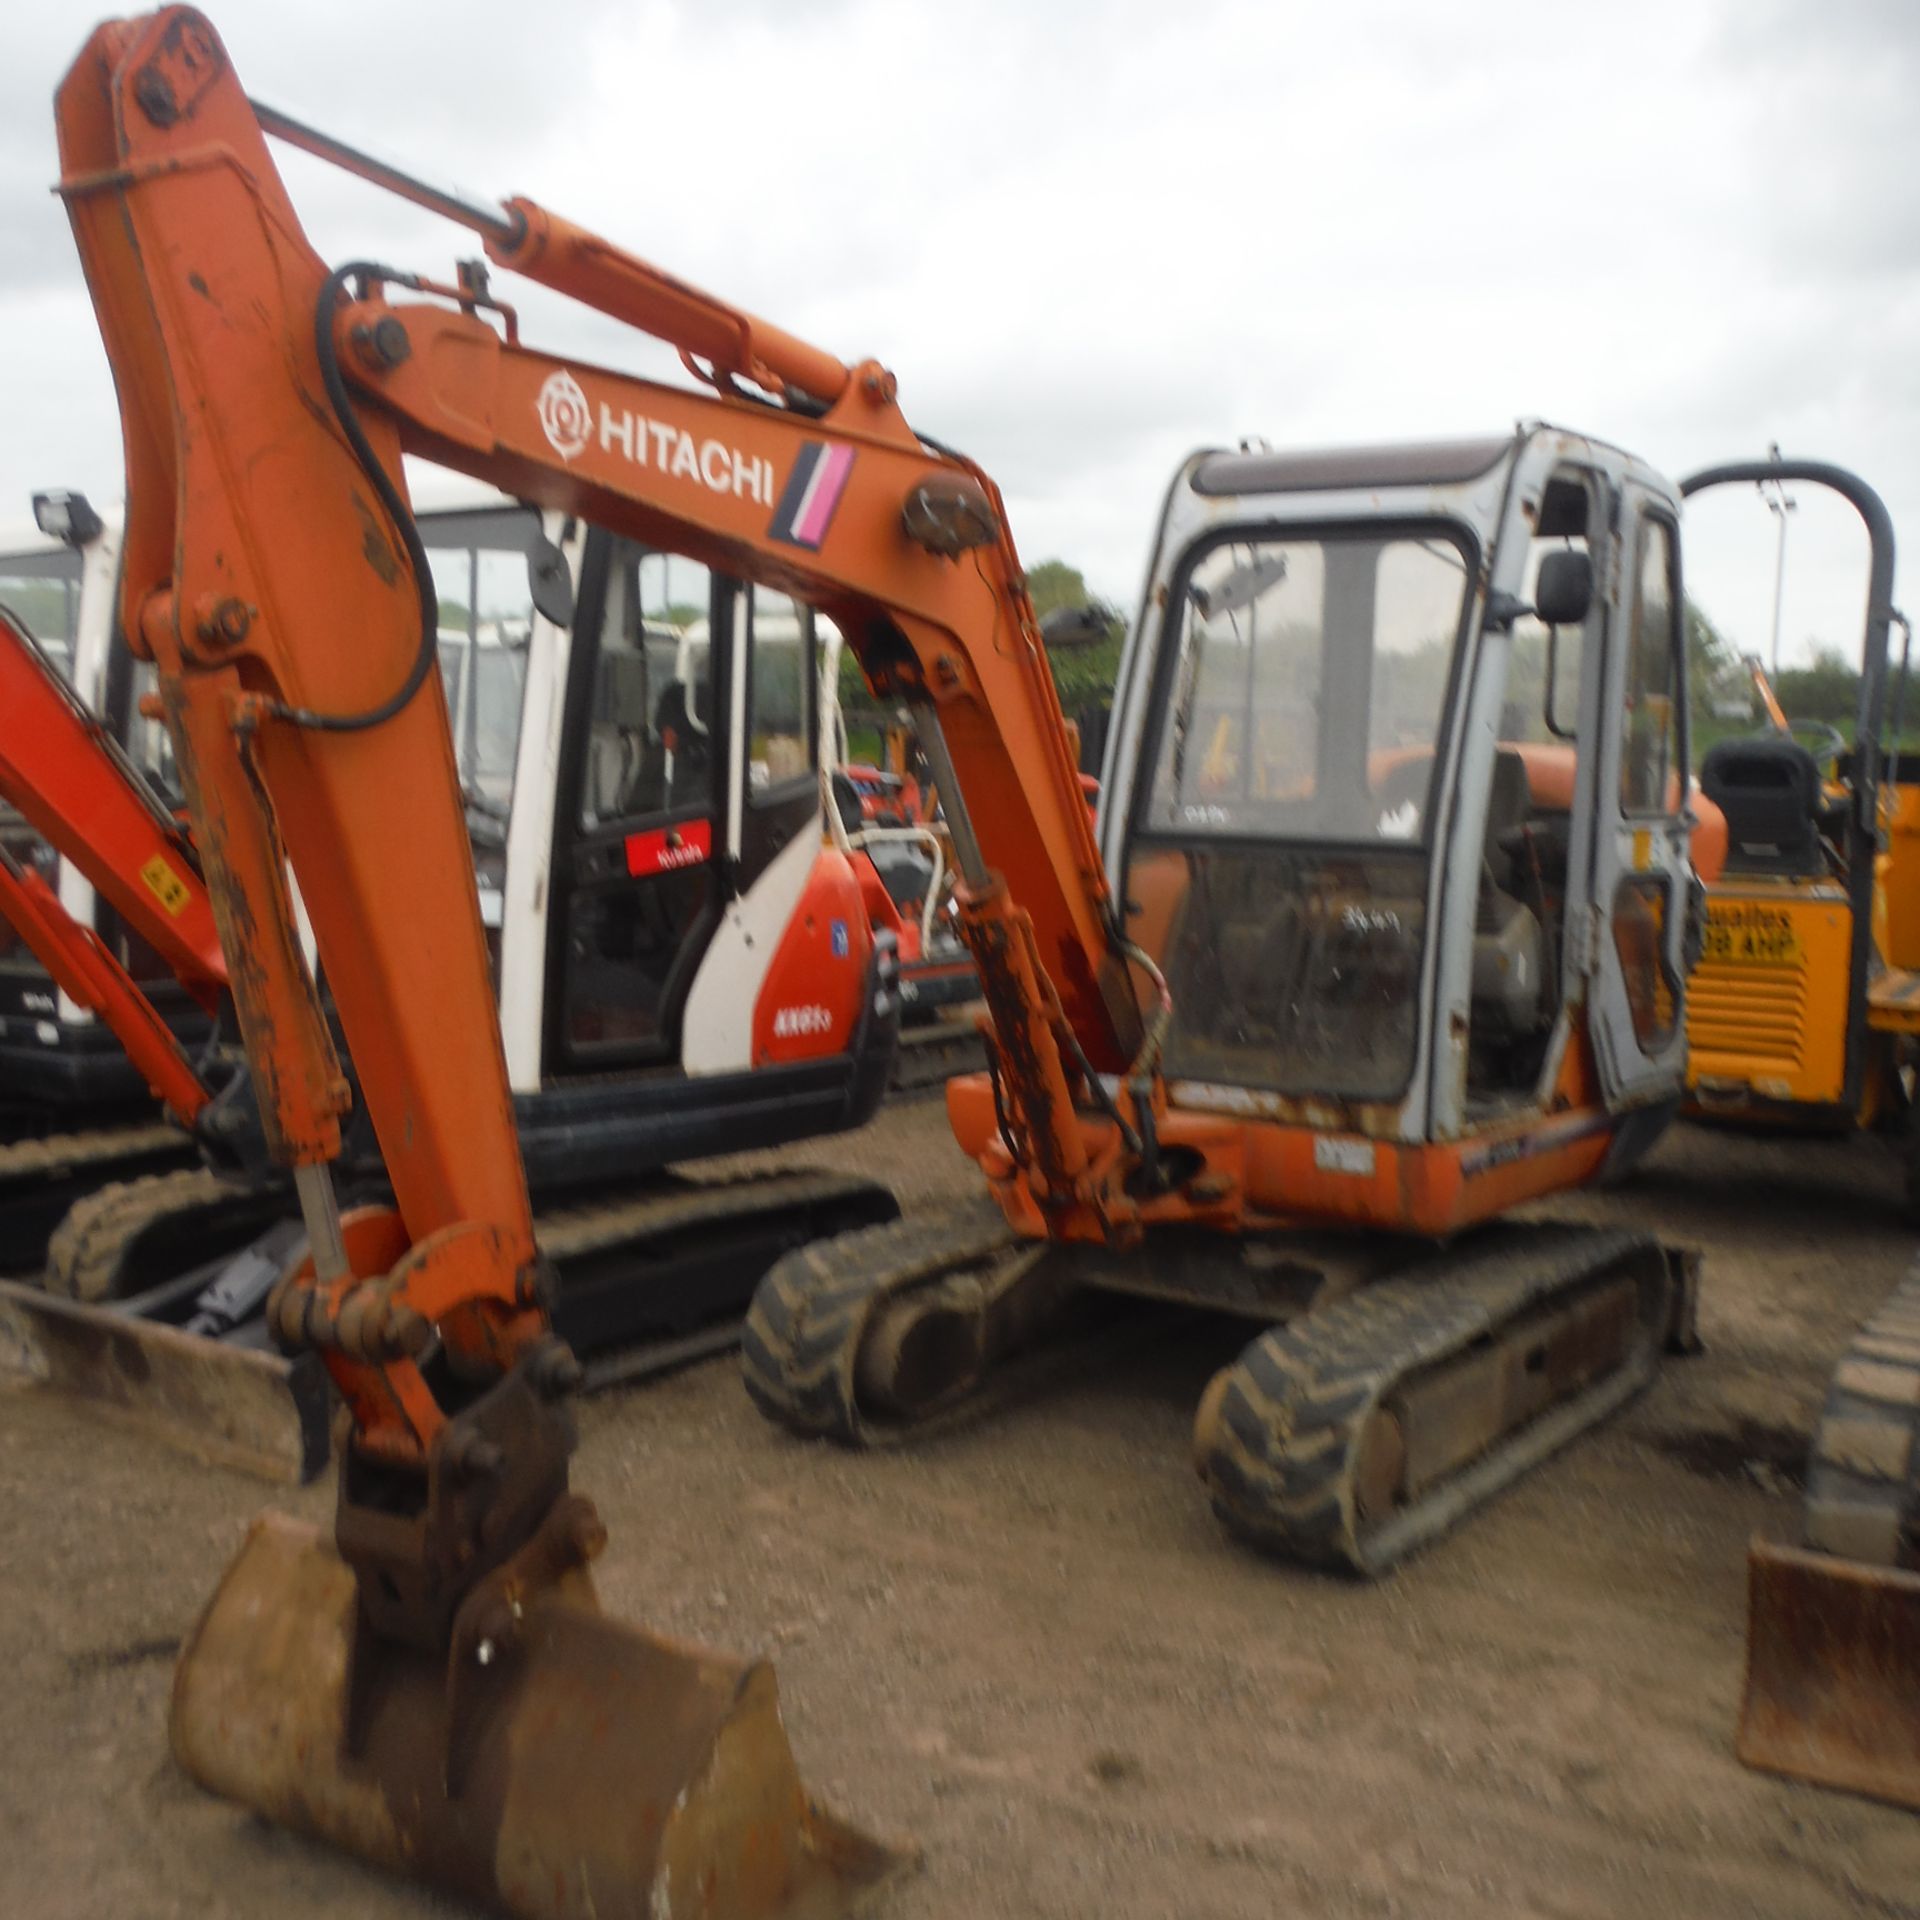 HITACHI EX35 rubber tracked excavator with bucket, blade & piped